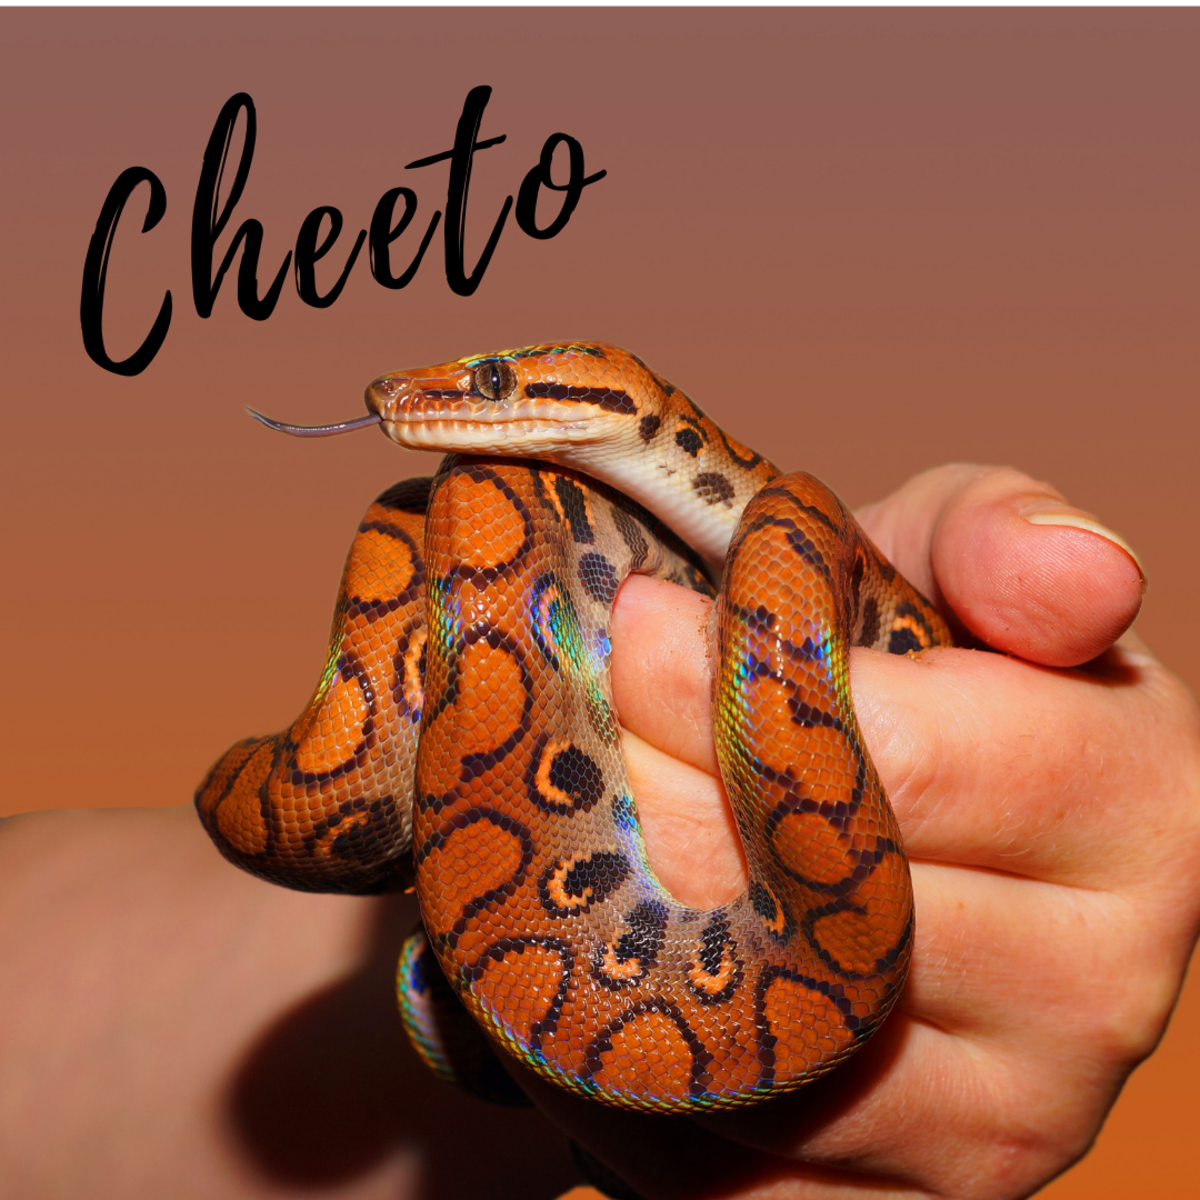 Is he a Cheeto?